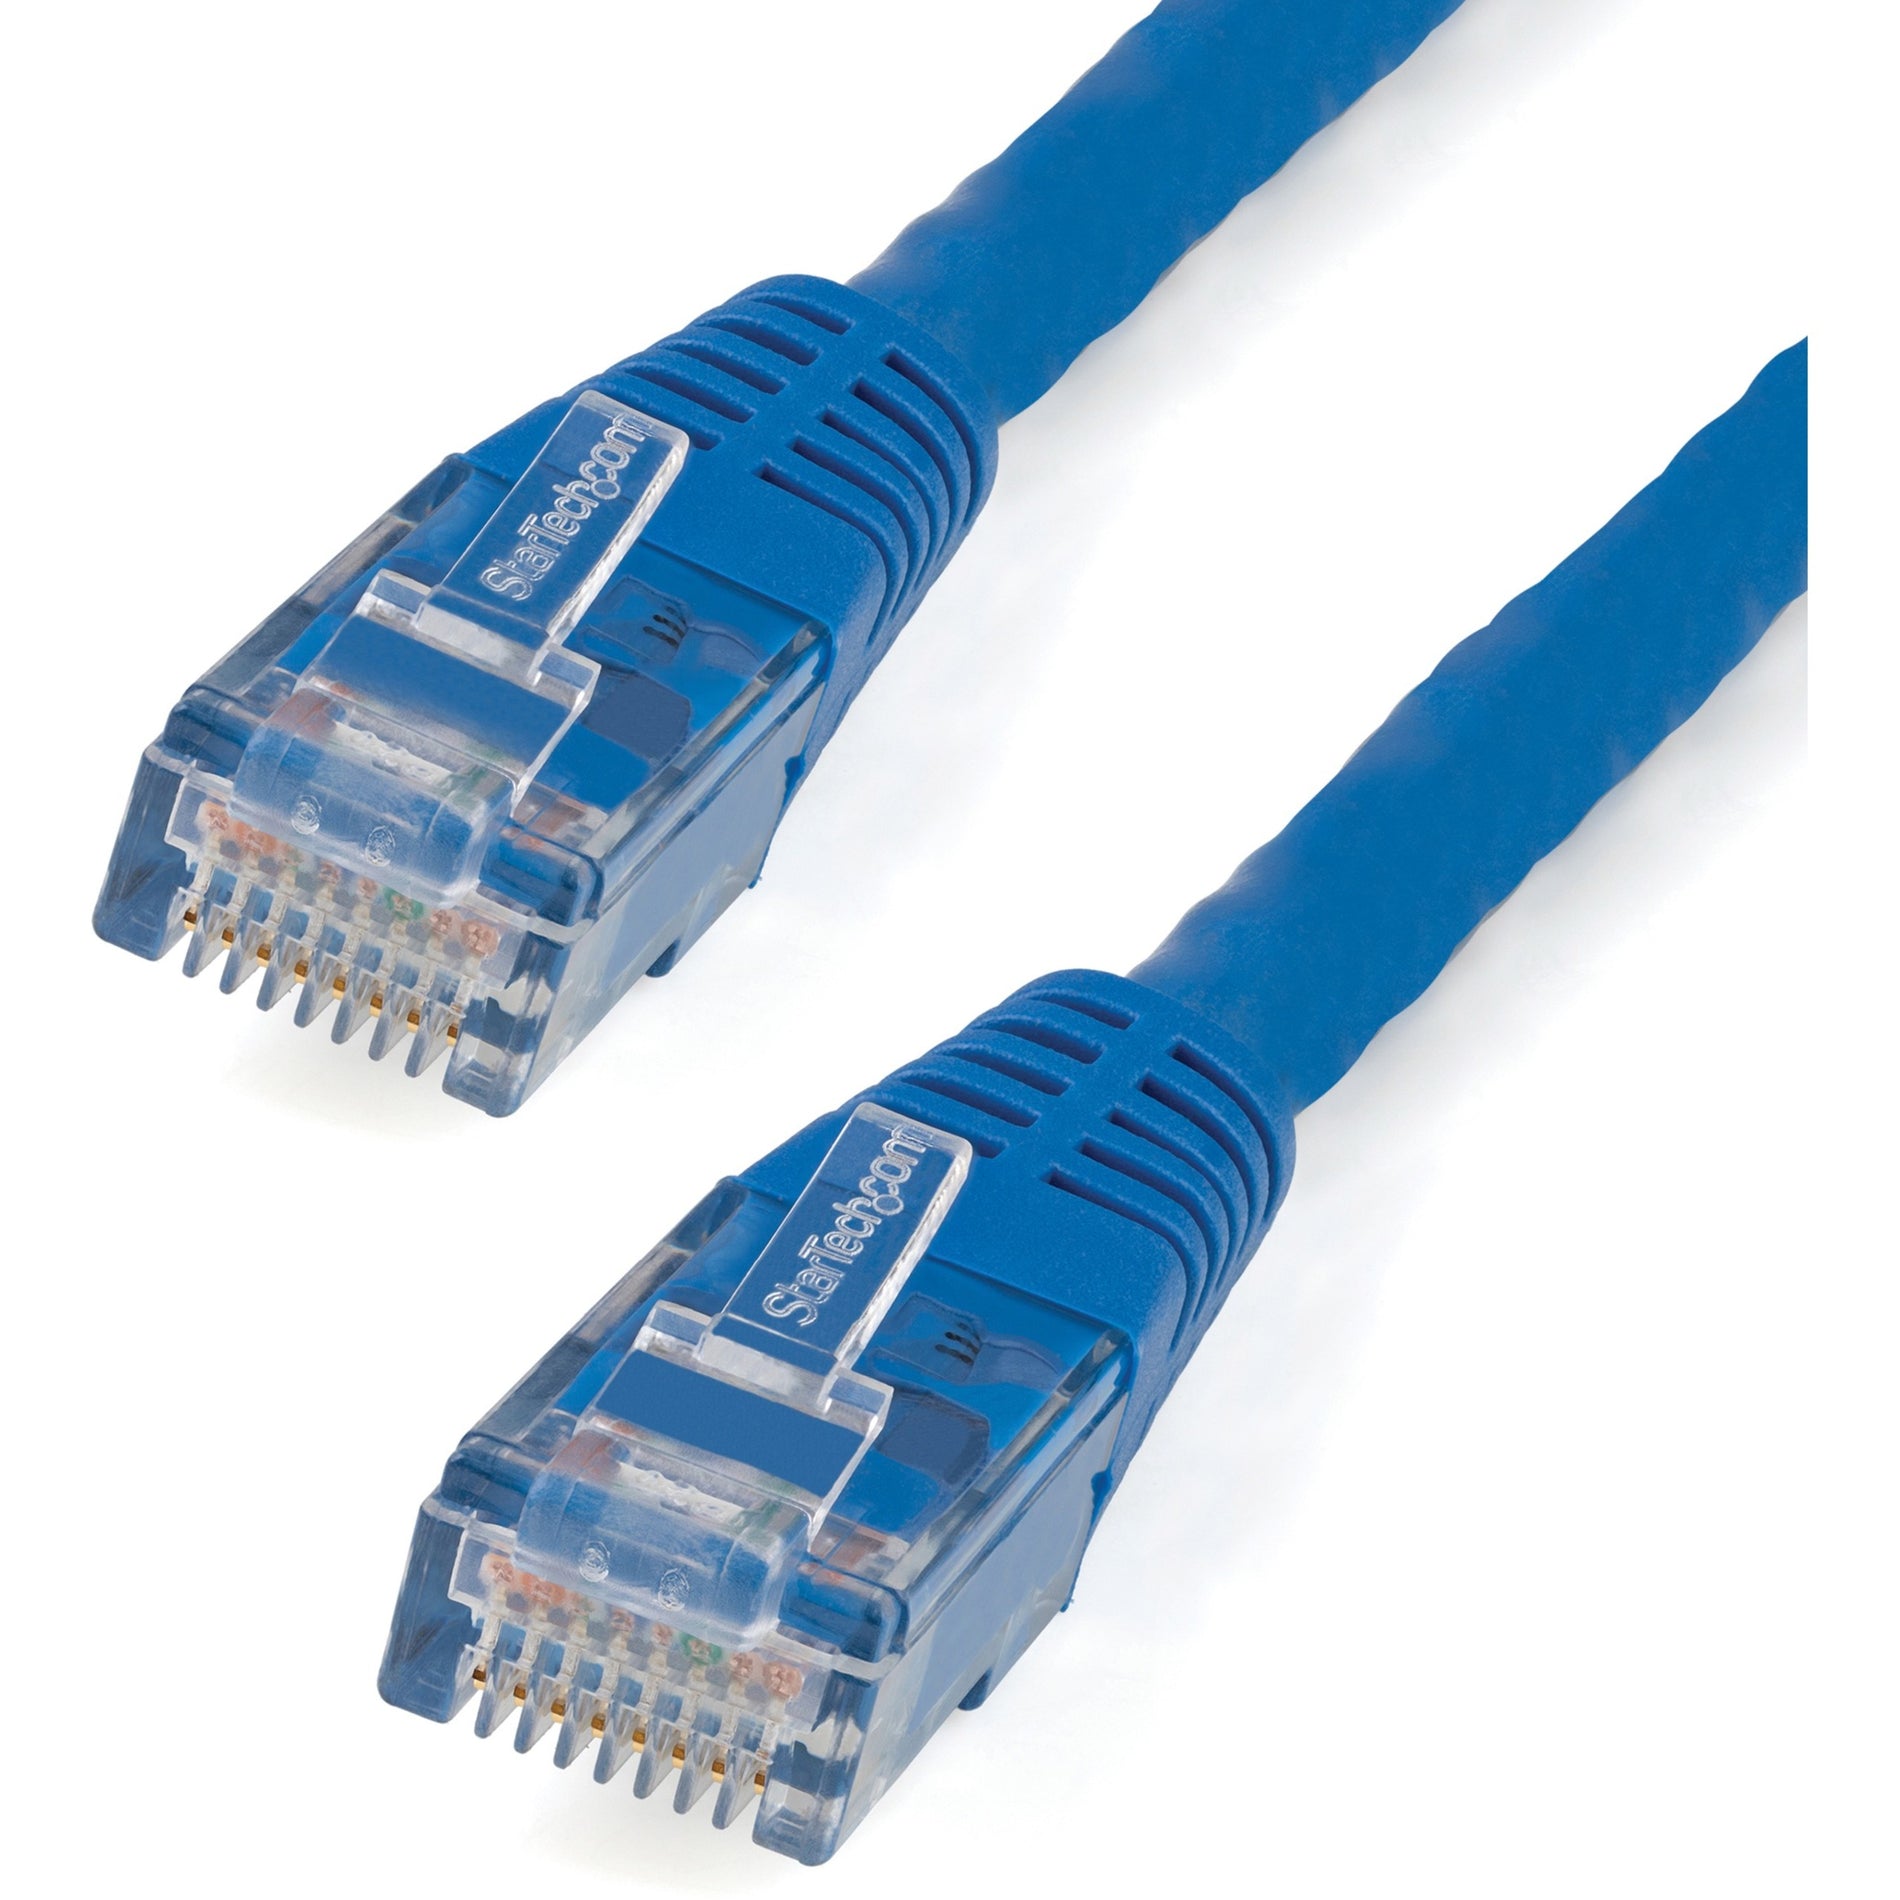 StarTech.com C6PATCH1BL 1 ft Blue Molded Cat 6 Patch Cable, 10 Gbit/s Data Transfer Rate, Gold Plated Connectors